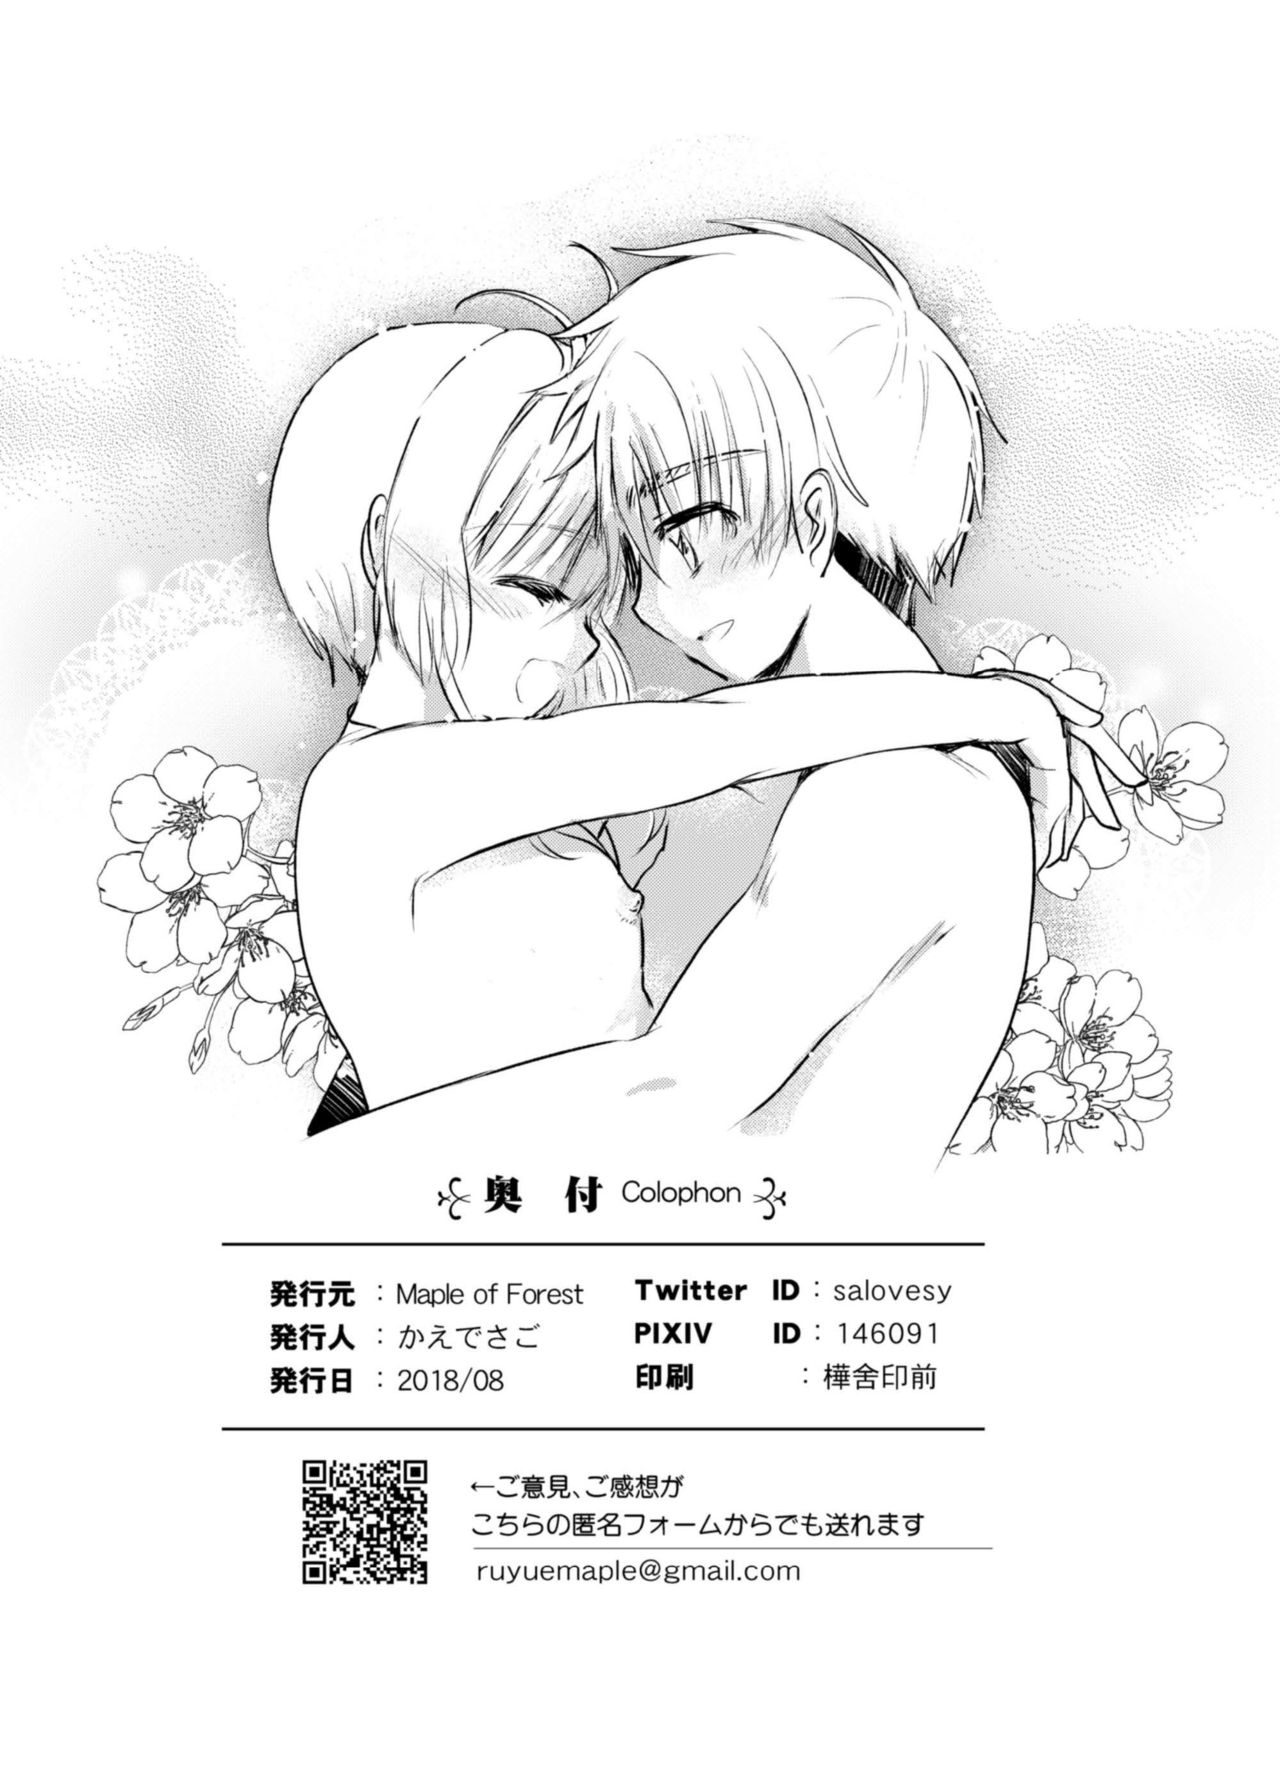 [Maple of Forest (Kaede Sago)] Give and Take (Cardcaptor Sakura) [Chinese] [新桥月白日语社] [Digital] page 41 full